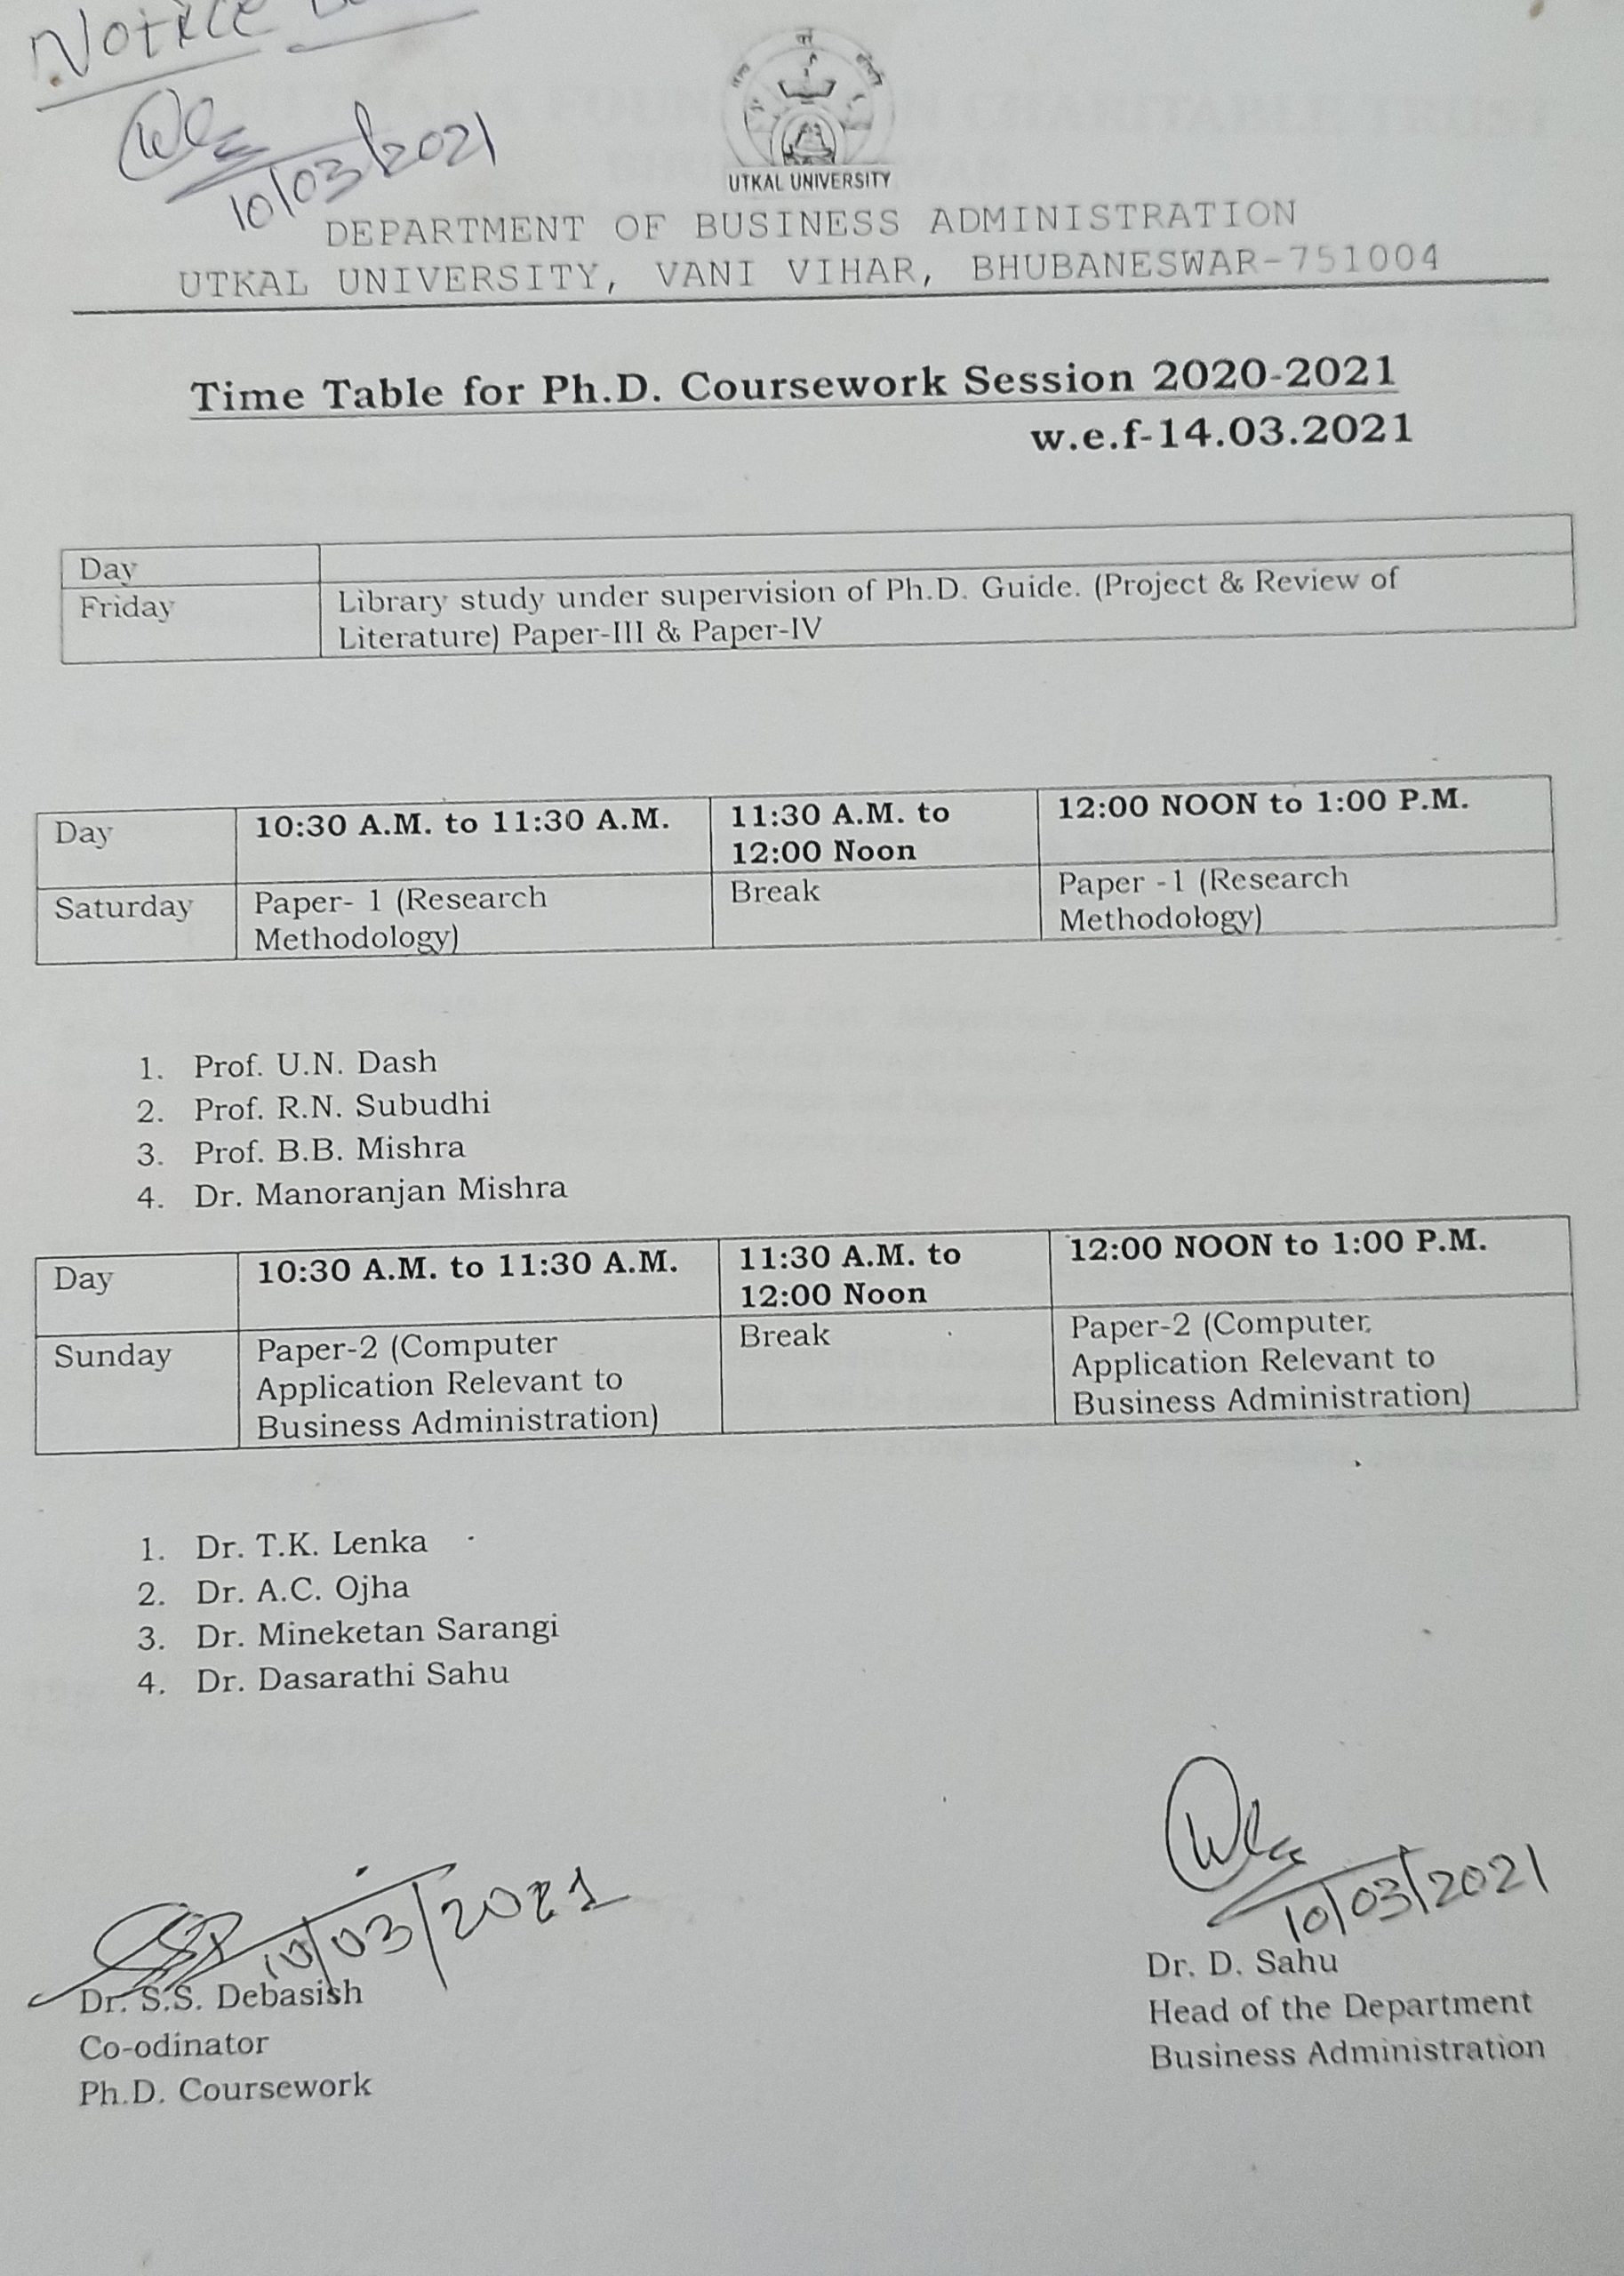 Time Table for Ph.D Coursework 2020-21